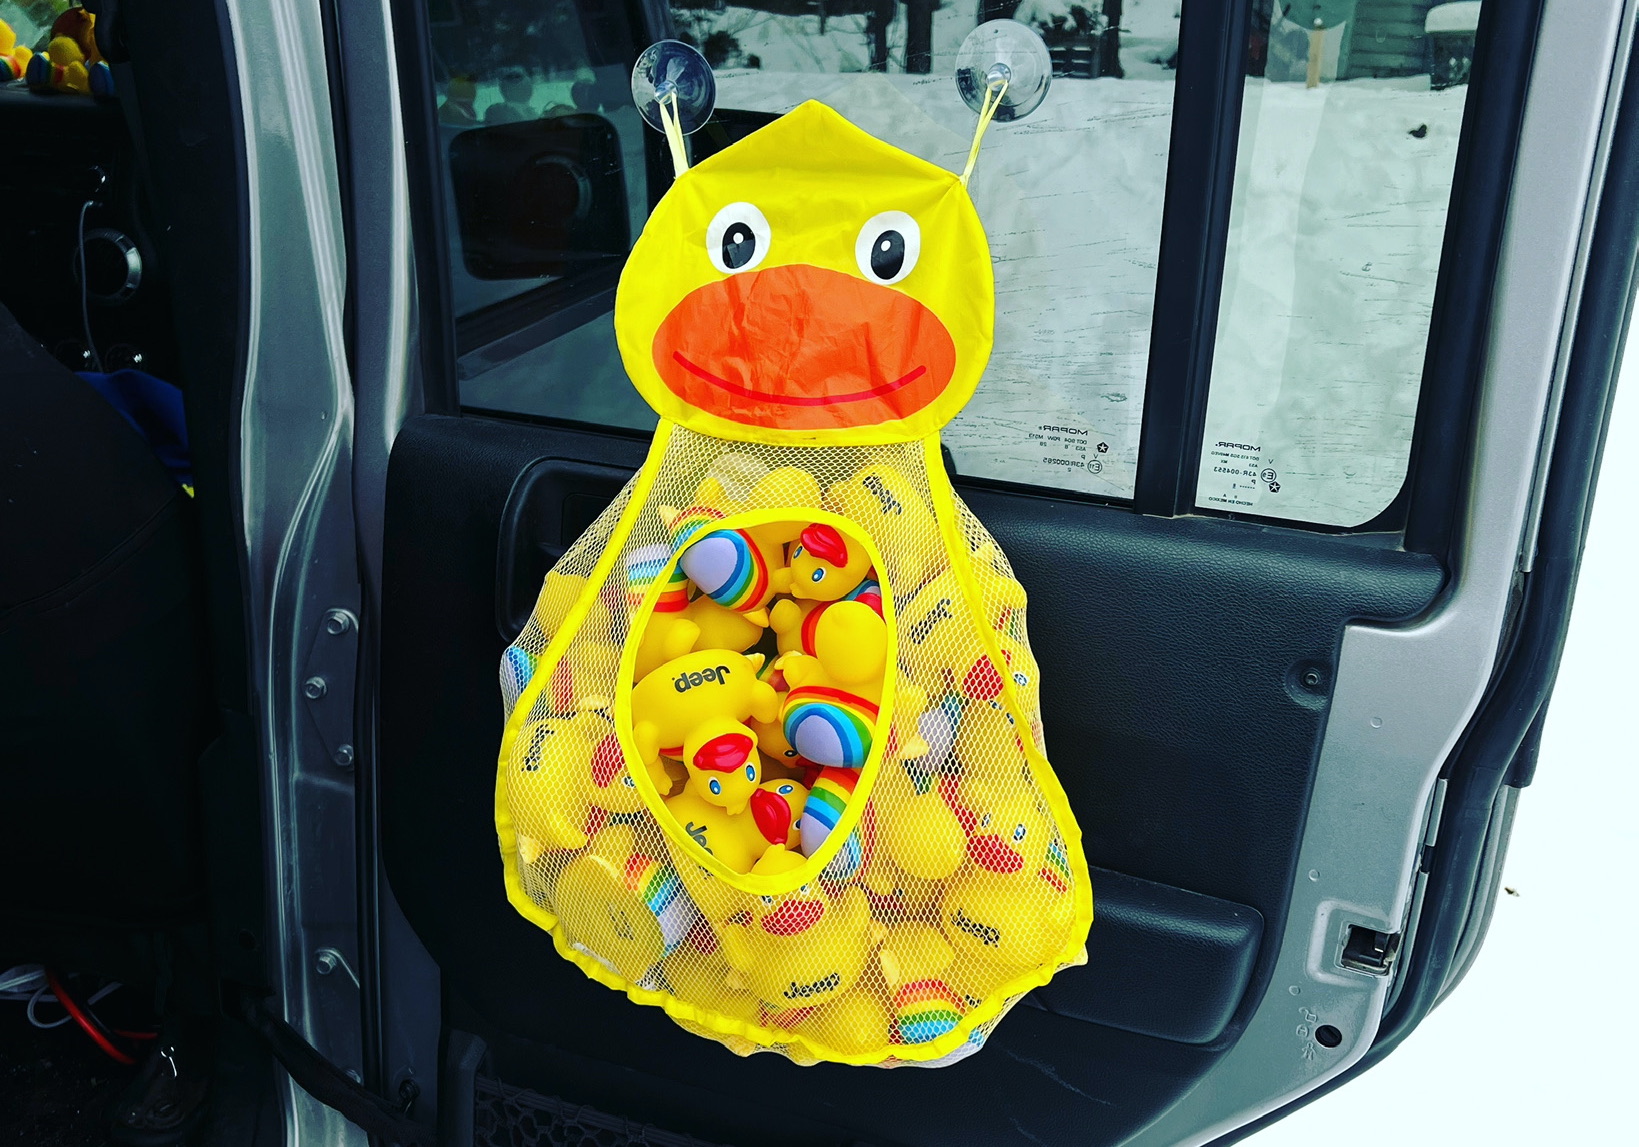 Jeep ducks: The story behind the wholesome viral trend